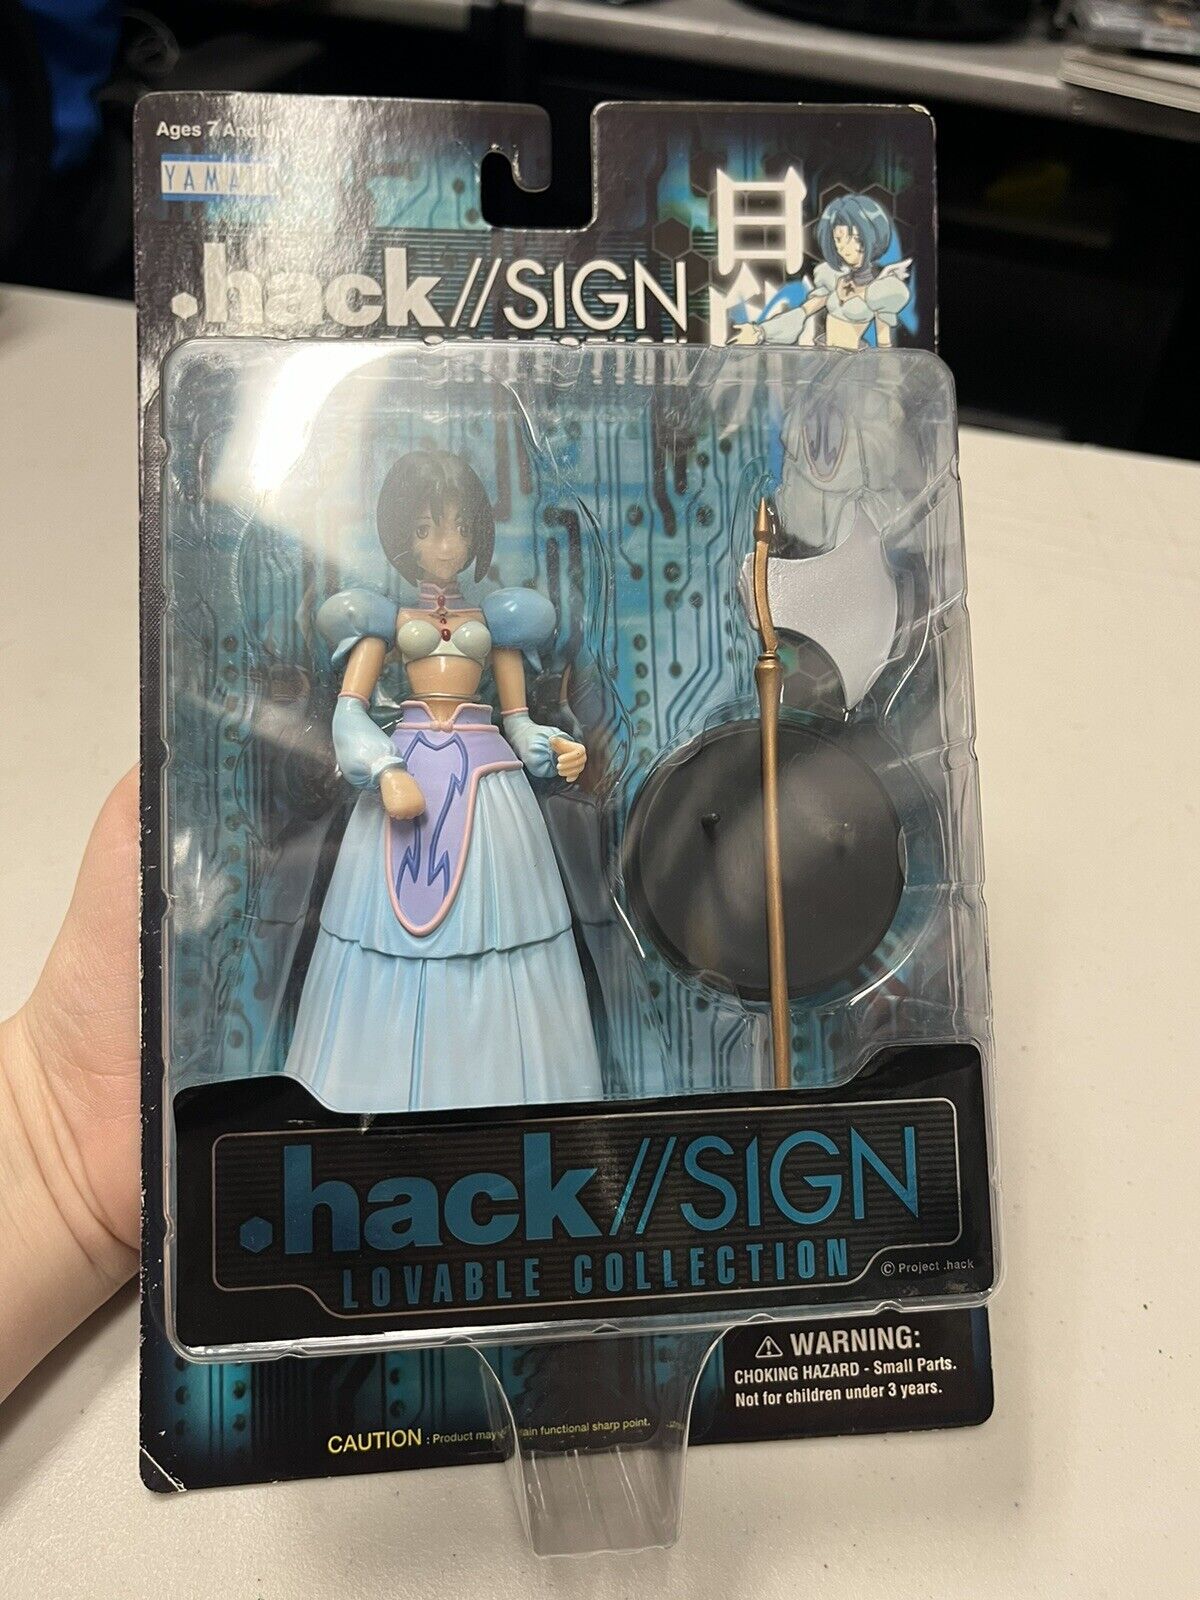 New .hack sign Loveable Collection Subaru Action Figure Dot Hack Sign 